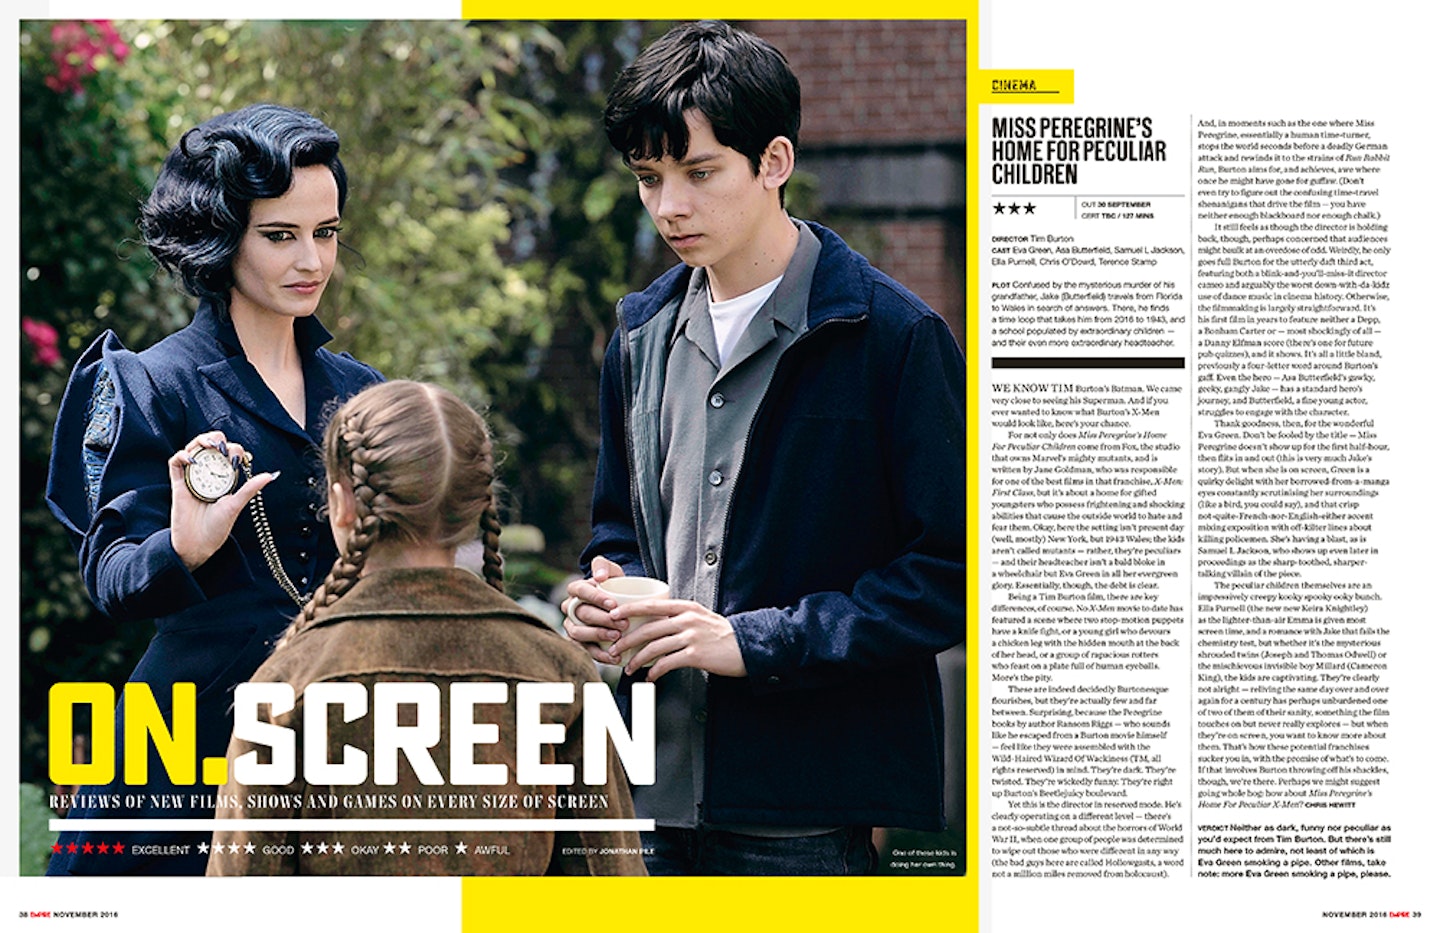 Miss Peregrine's in On Screen